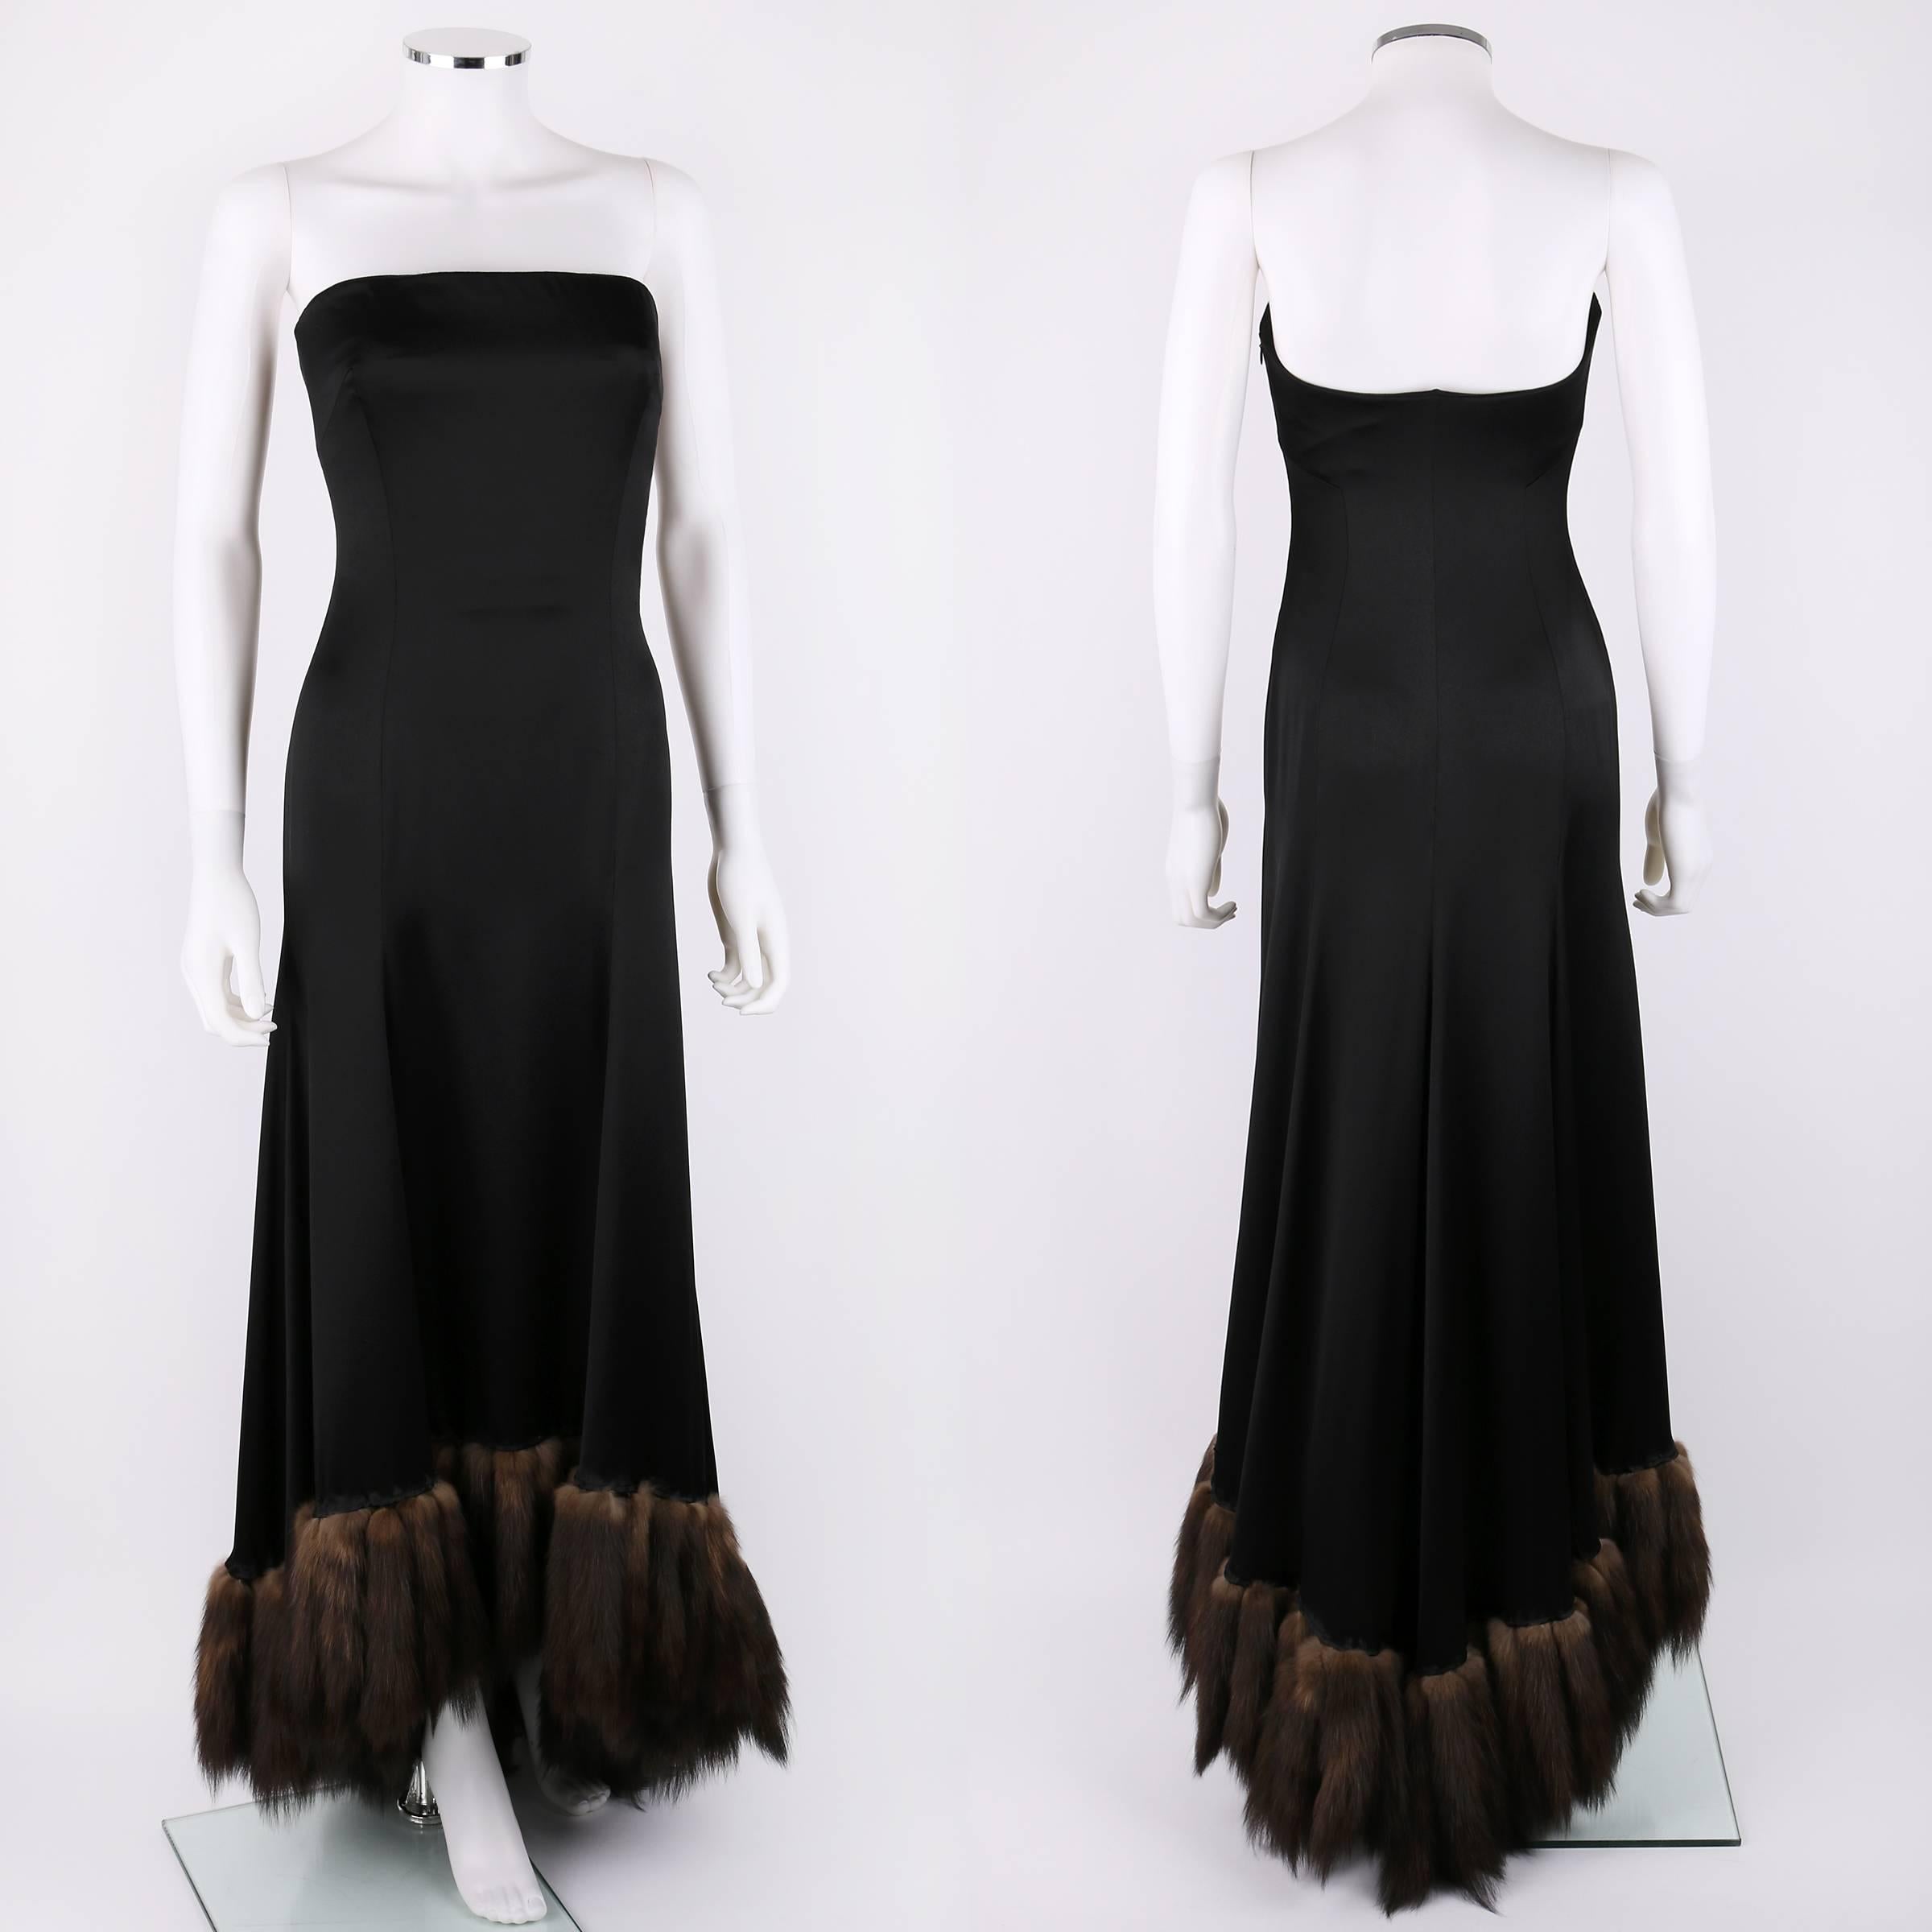 J Mendel Paris black satin strapless evening gown. Hi-lo hemline is trimmed with genuine sable fur. Interior boned bustier has separate zip closure. Zips at side. There is no fabric content label, but this dress is crafted of a silk / satin with